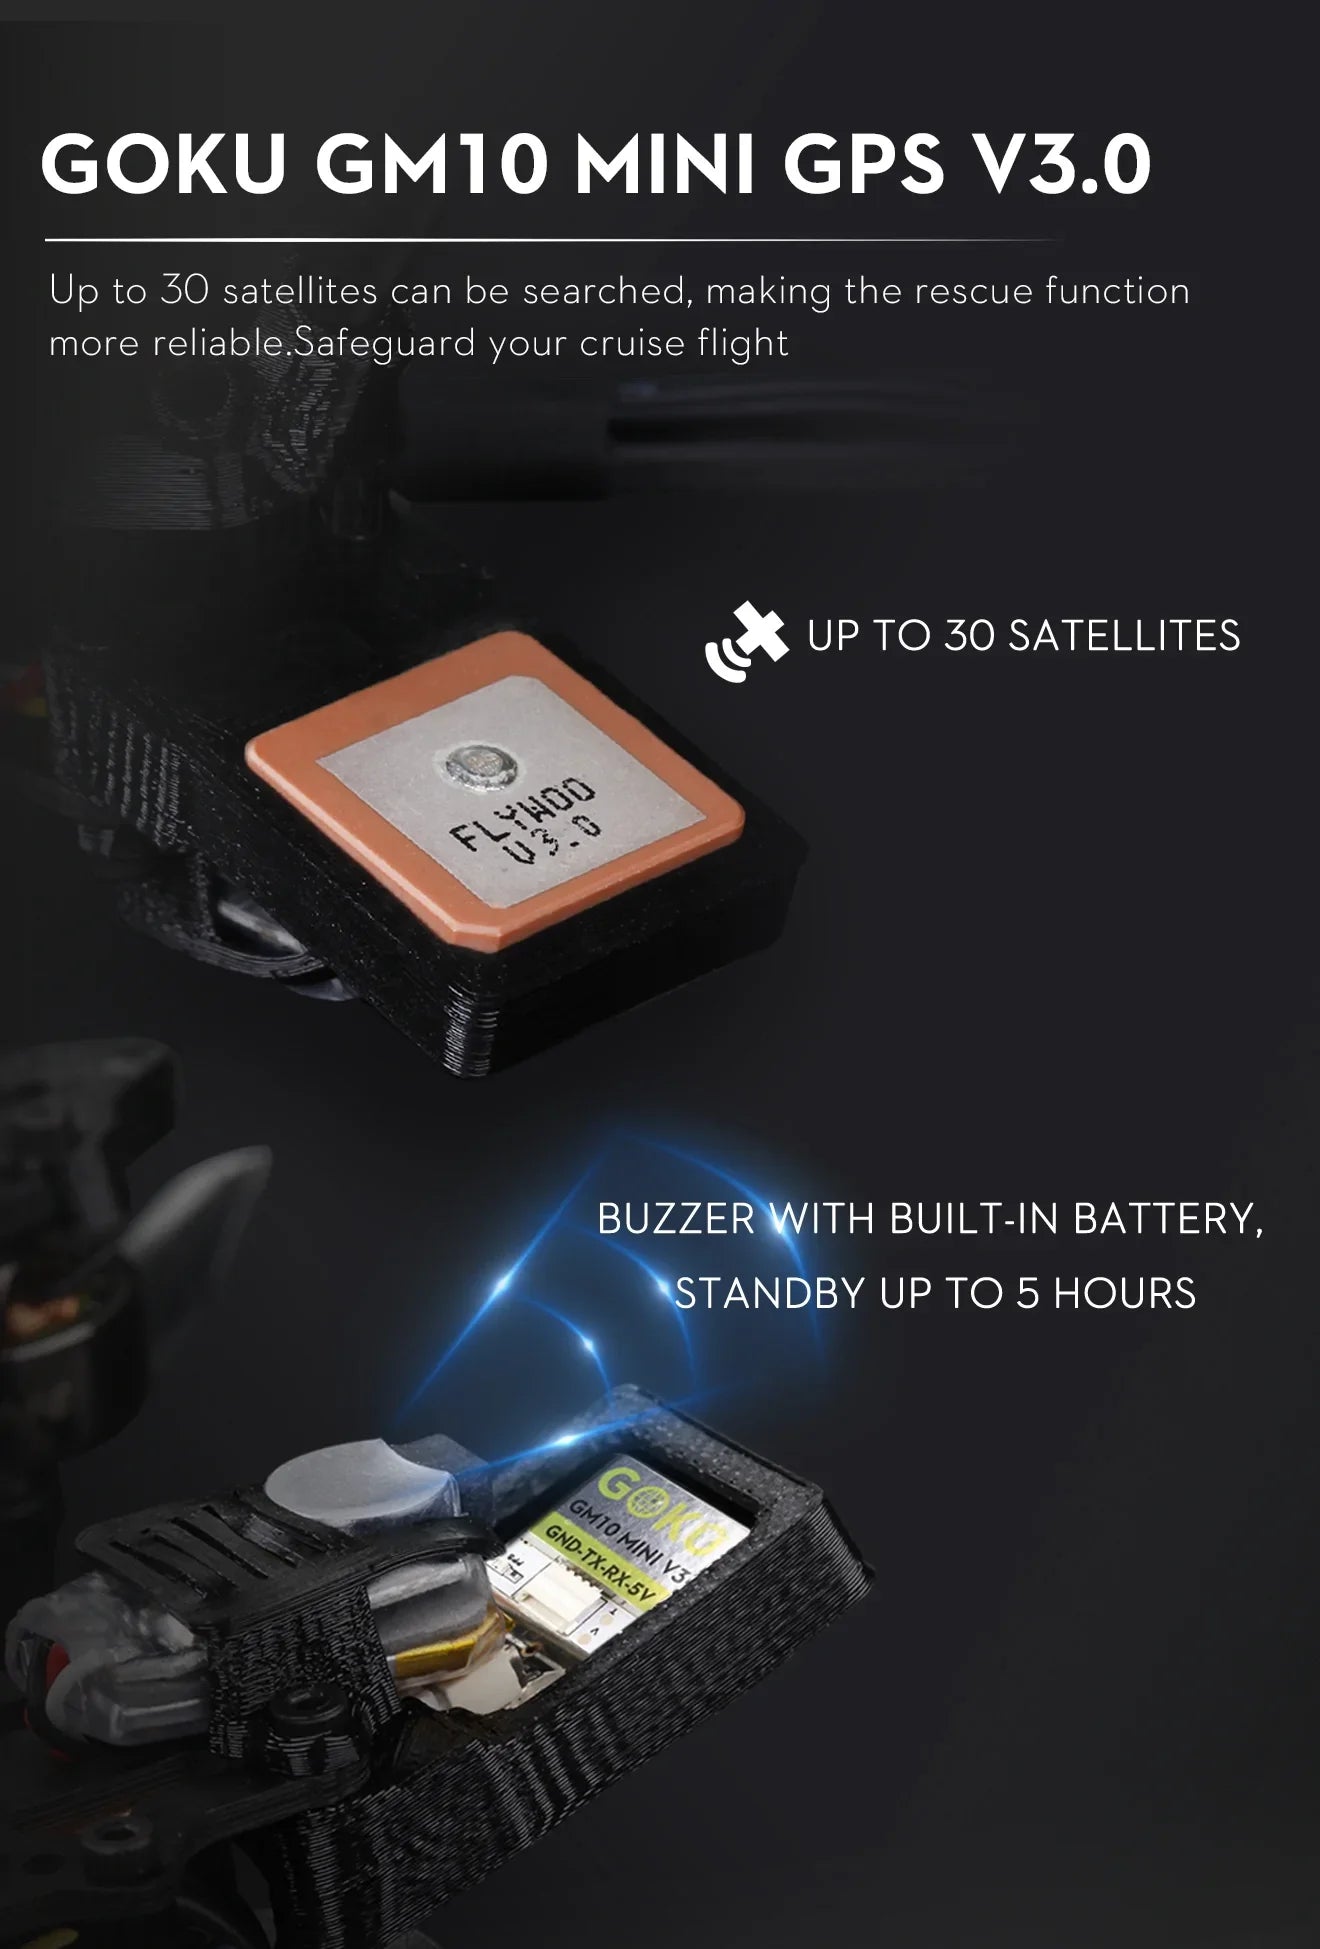 GOKU GMIO MINI GPS V3.0 Up to 30 satellites can be searched